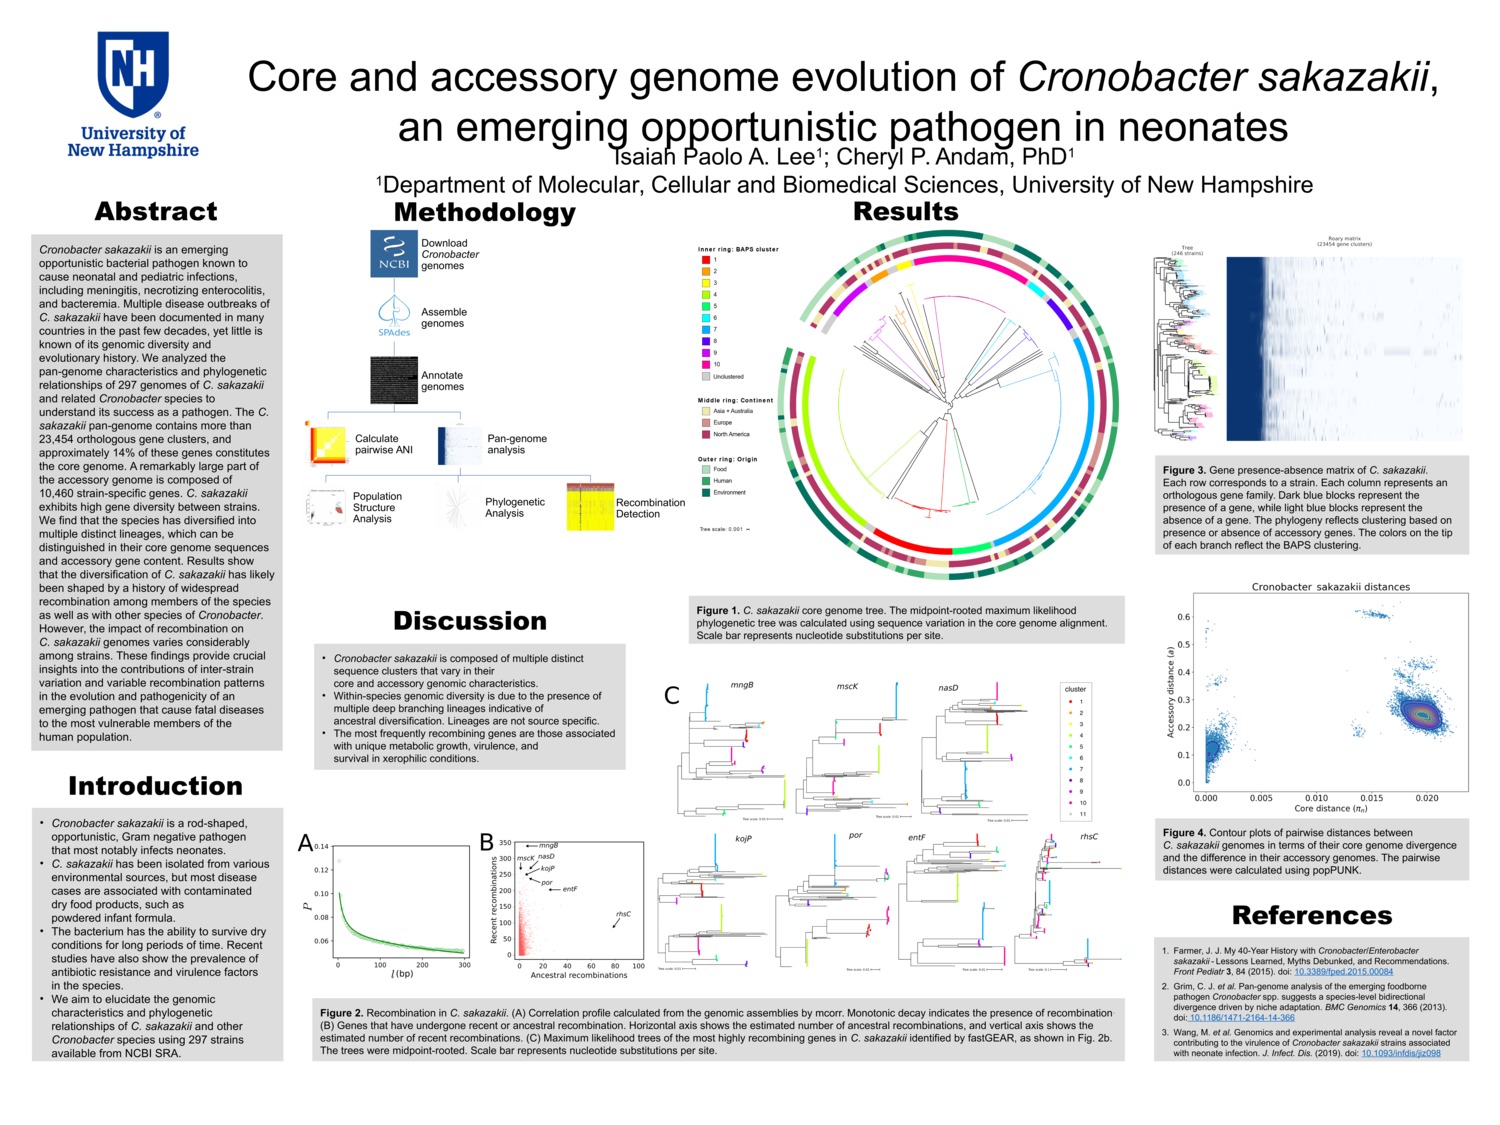 Core And Accessory Genome Evolution Of Cronobacter Sakazakii, An Emerging Opportunistic Pathogen In Neonates by ial1006